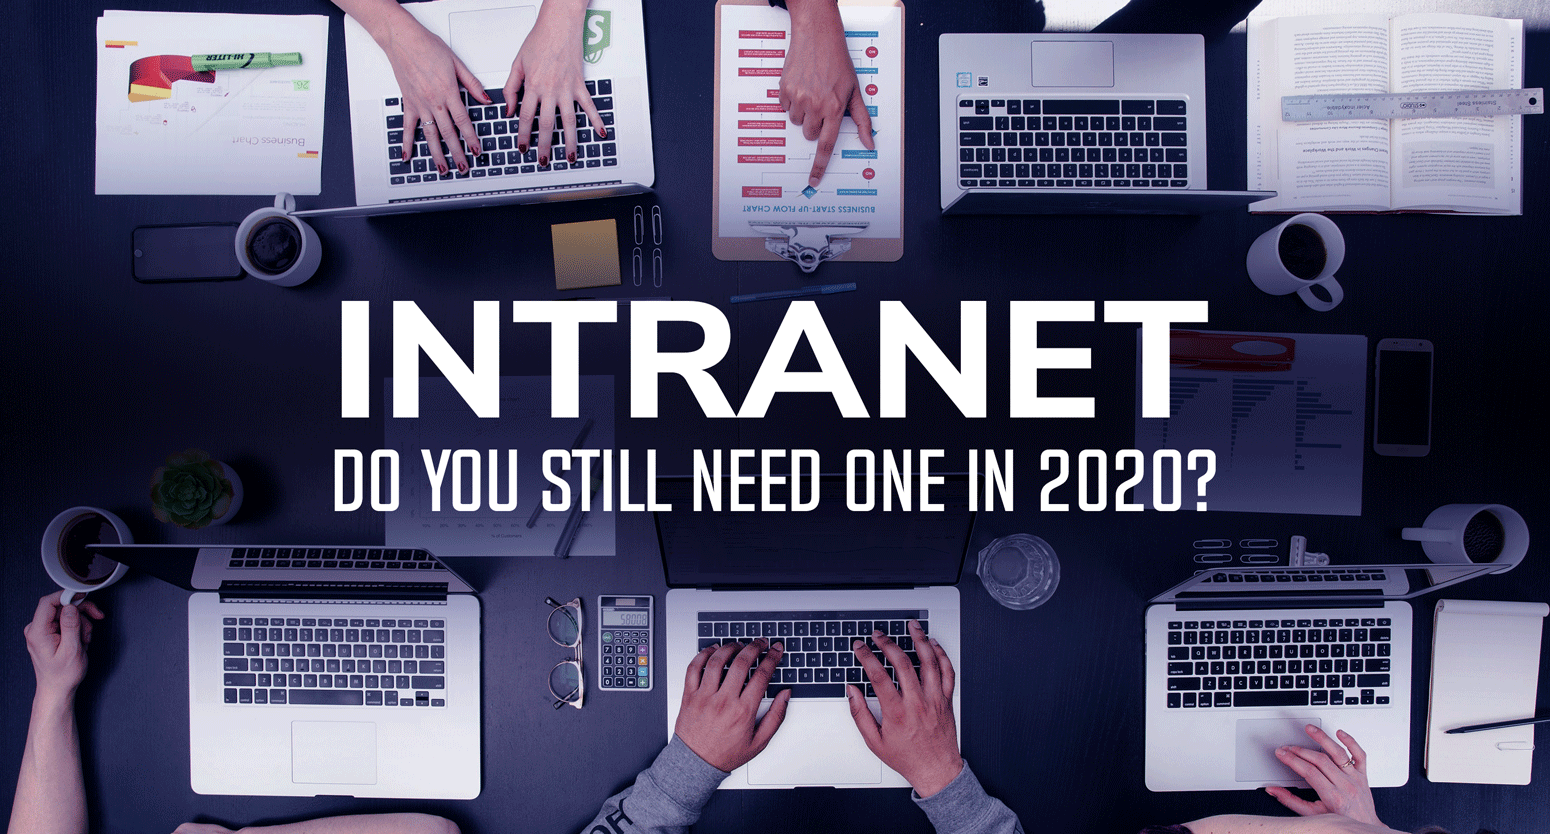 Intranet connecting people